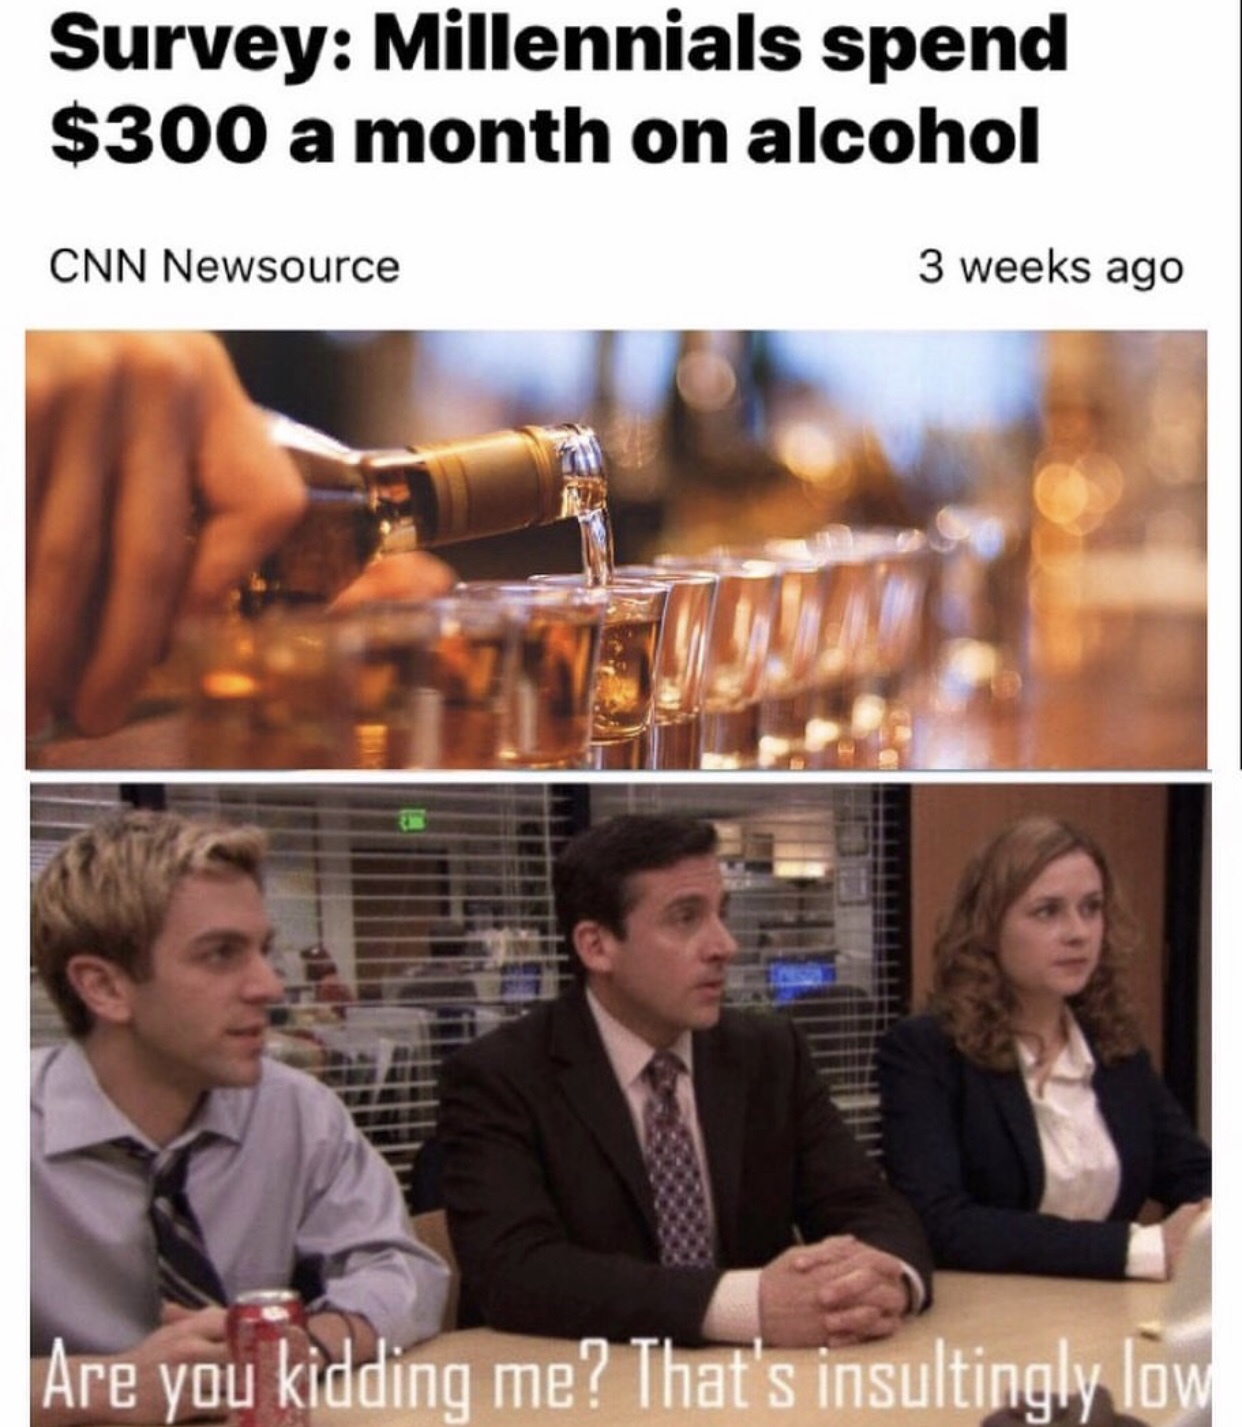 you kidding me that's insultingly low blank - Survey Millennials spend $300 a month on alcohol Cnn Newsource 3 weeks ago Are you kidding me? That's insultingly low